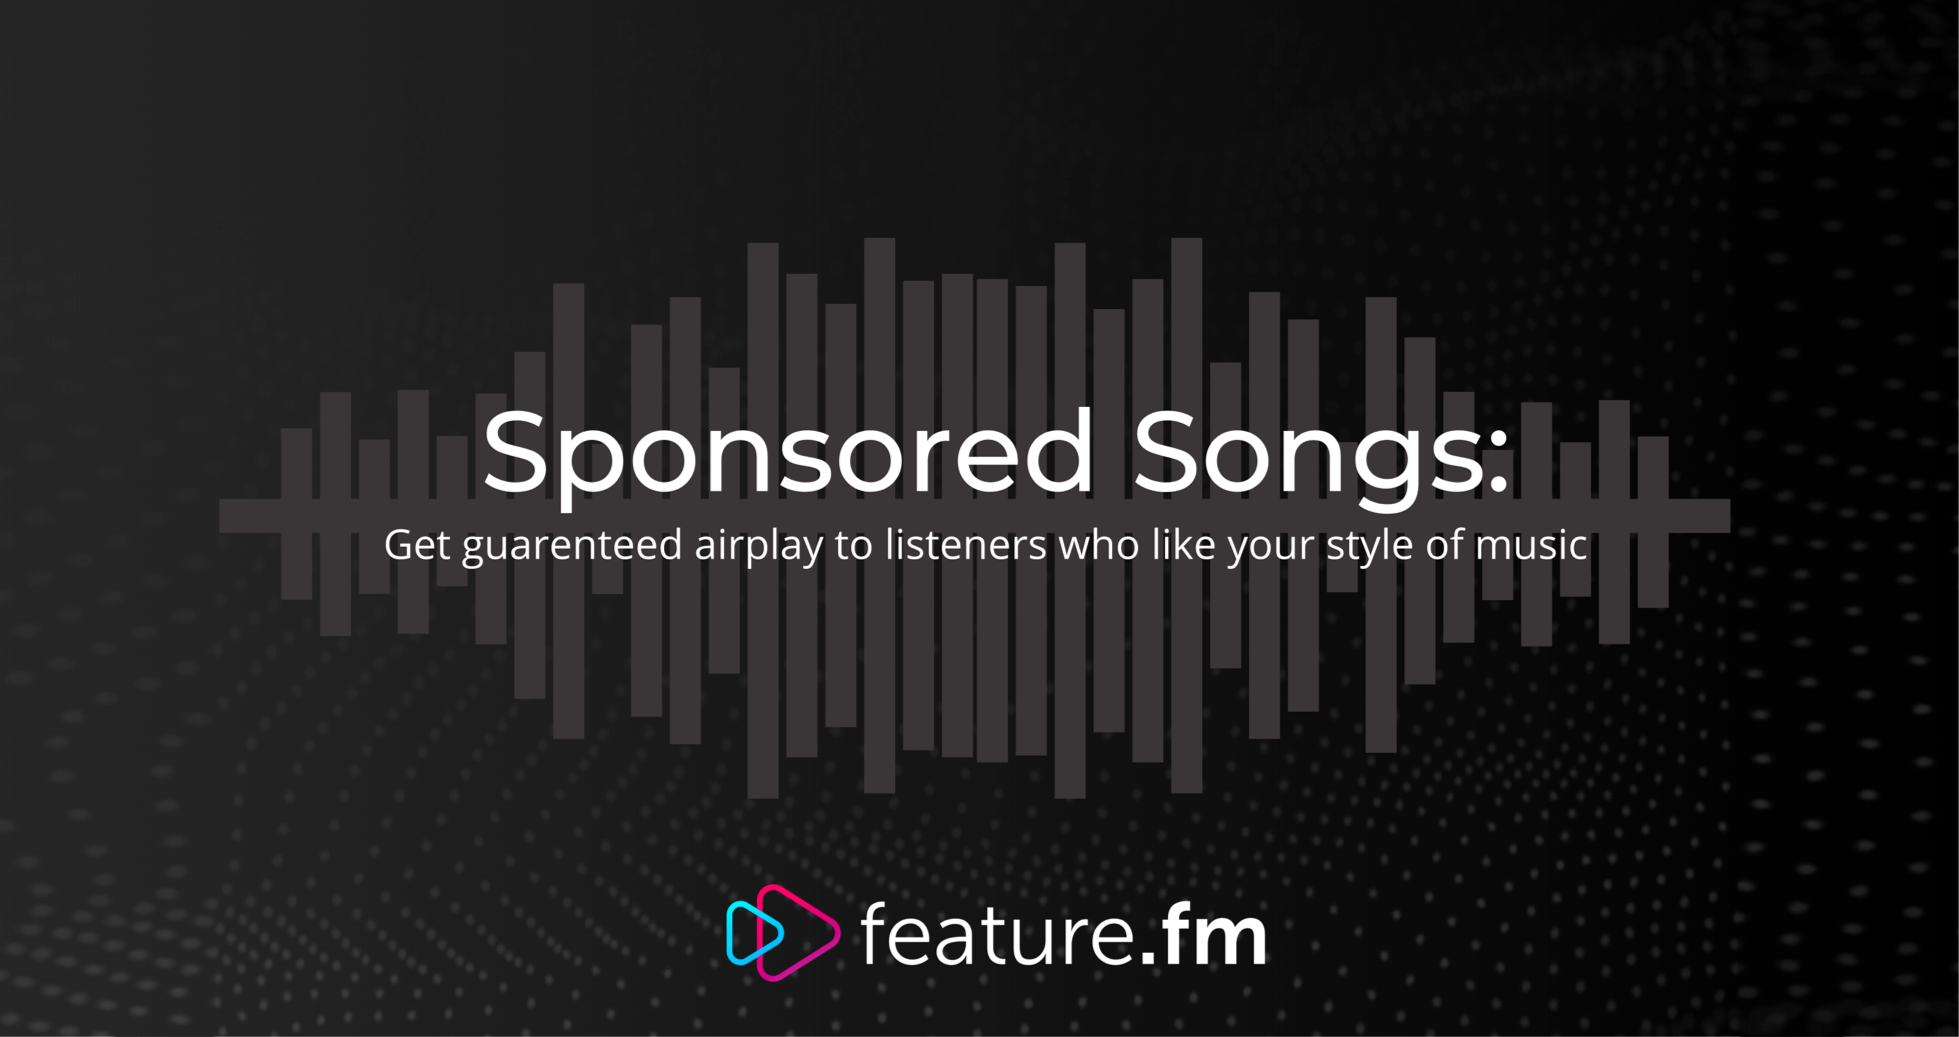 Getting guaranteed streams using Sponsored Songs campaigns